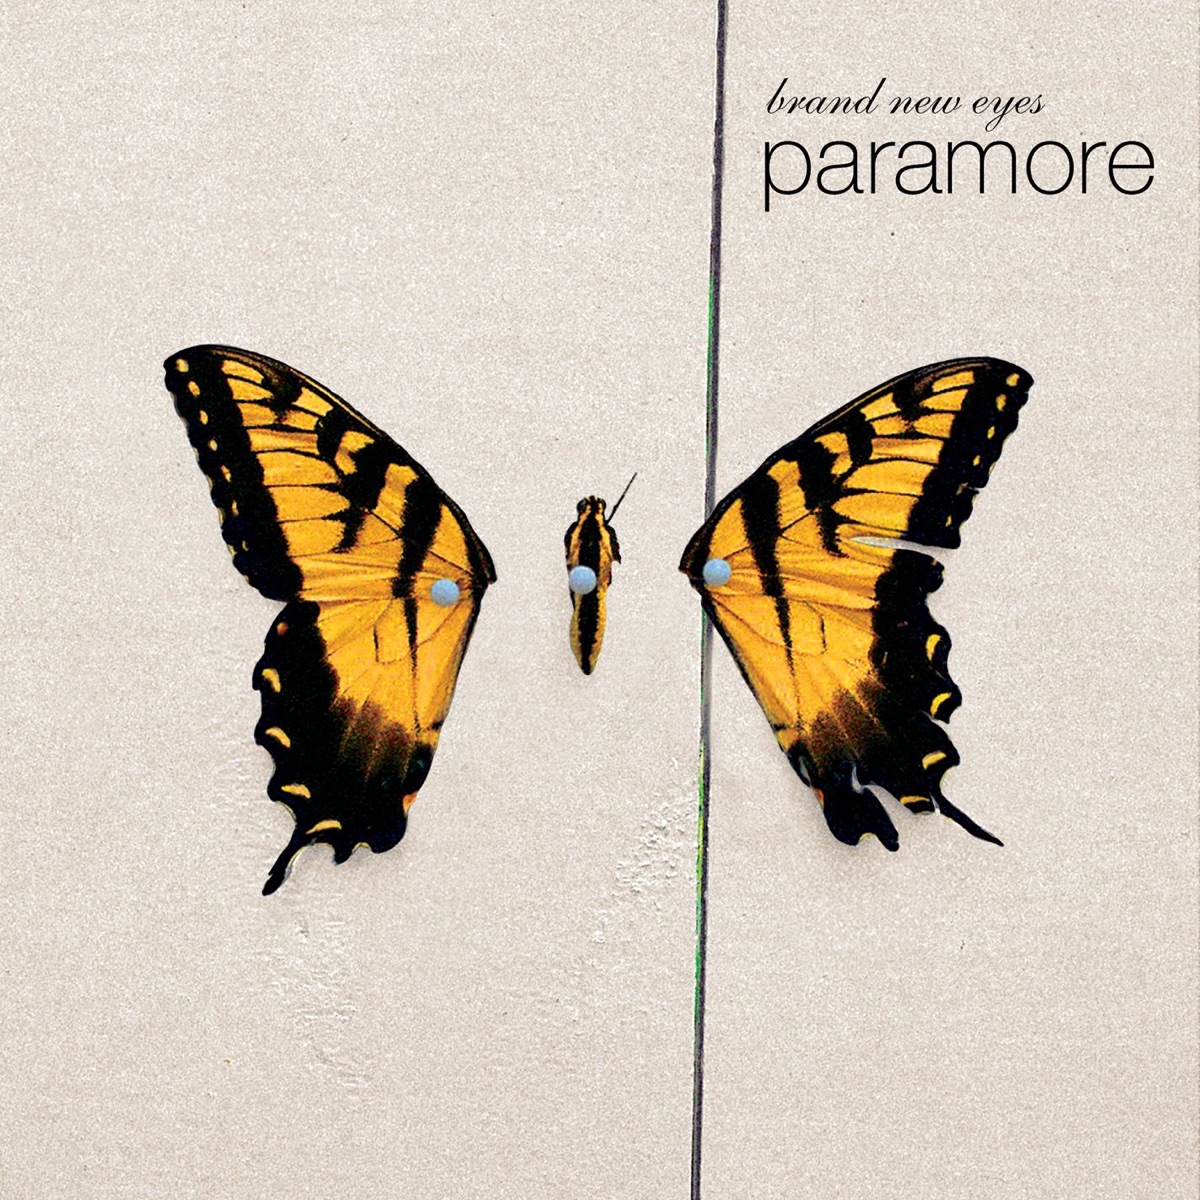 paramore brand new eyes cd cover